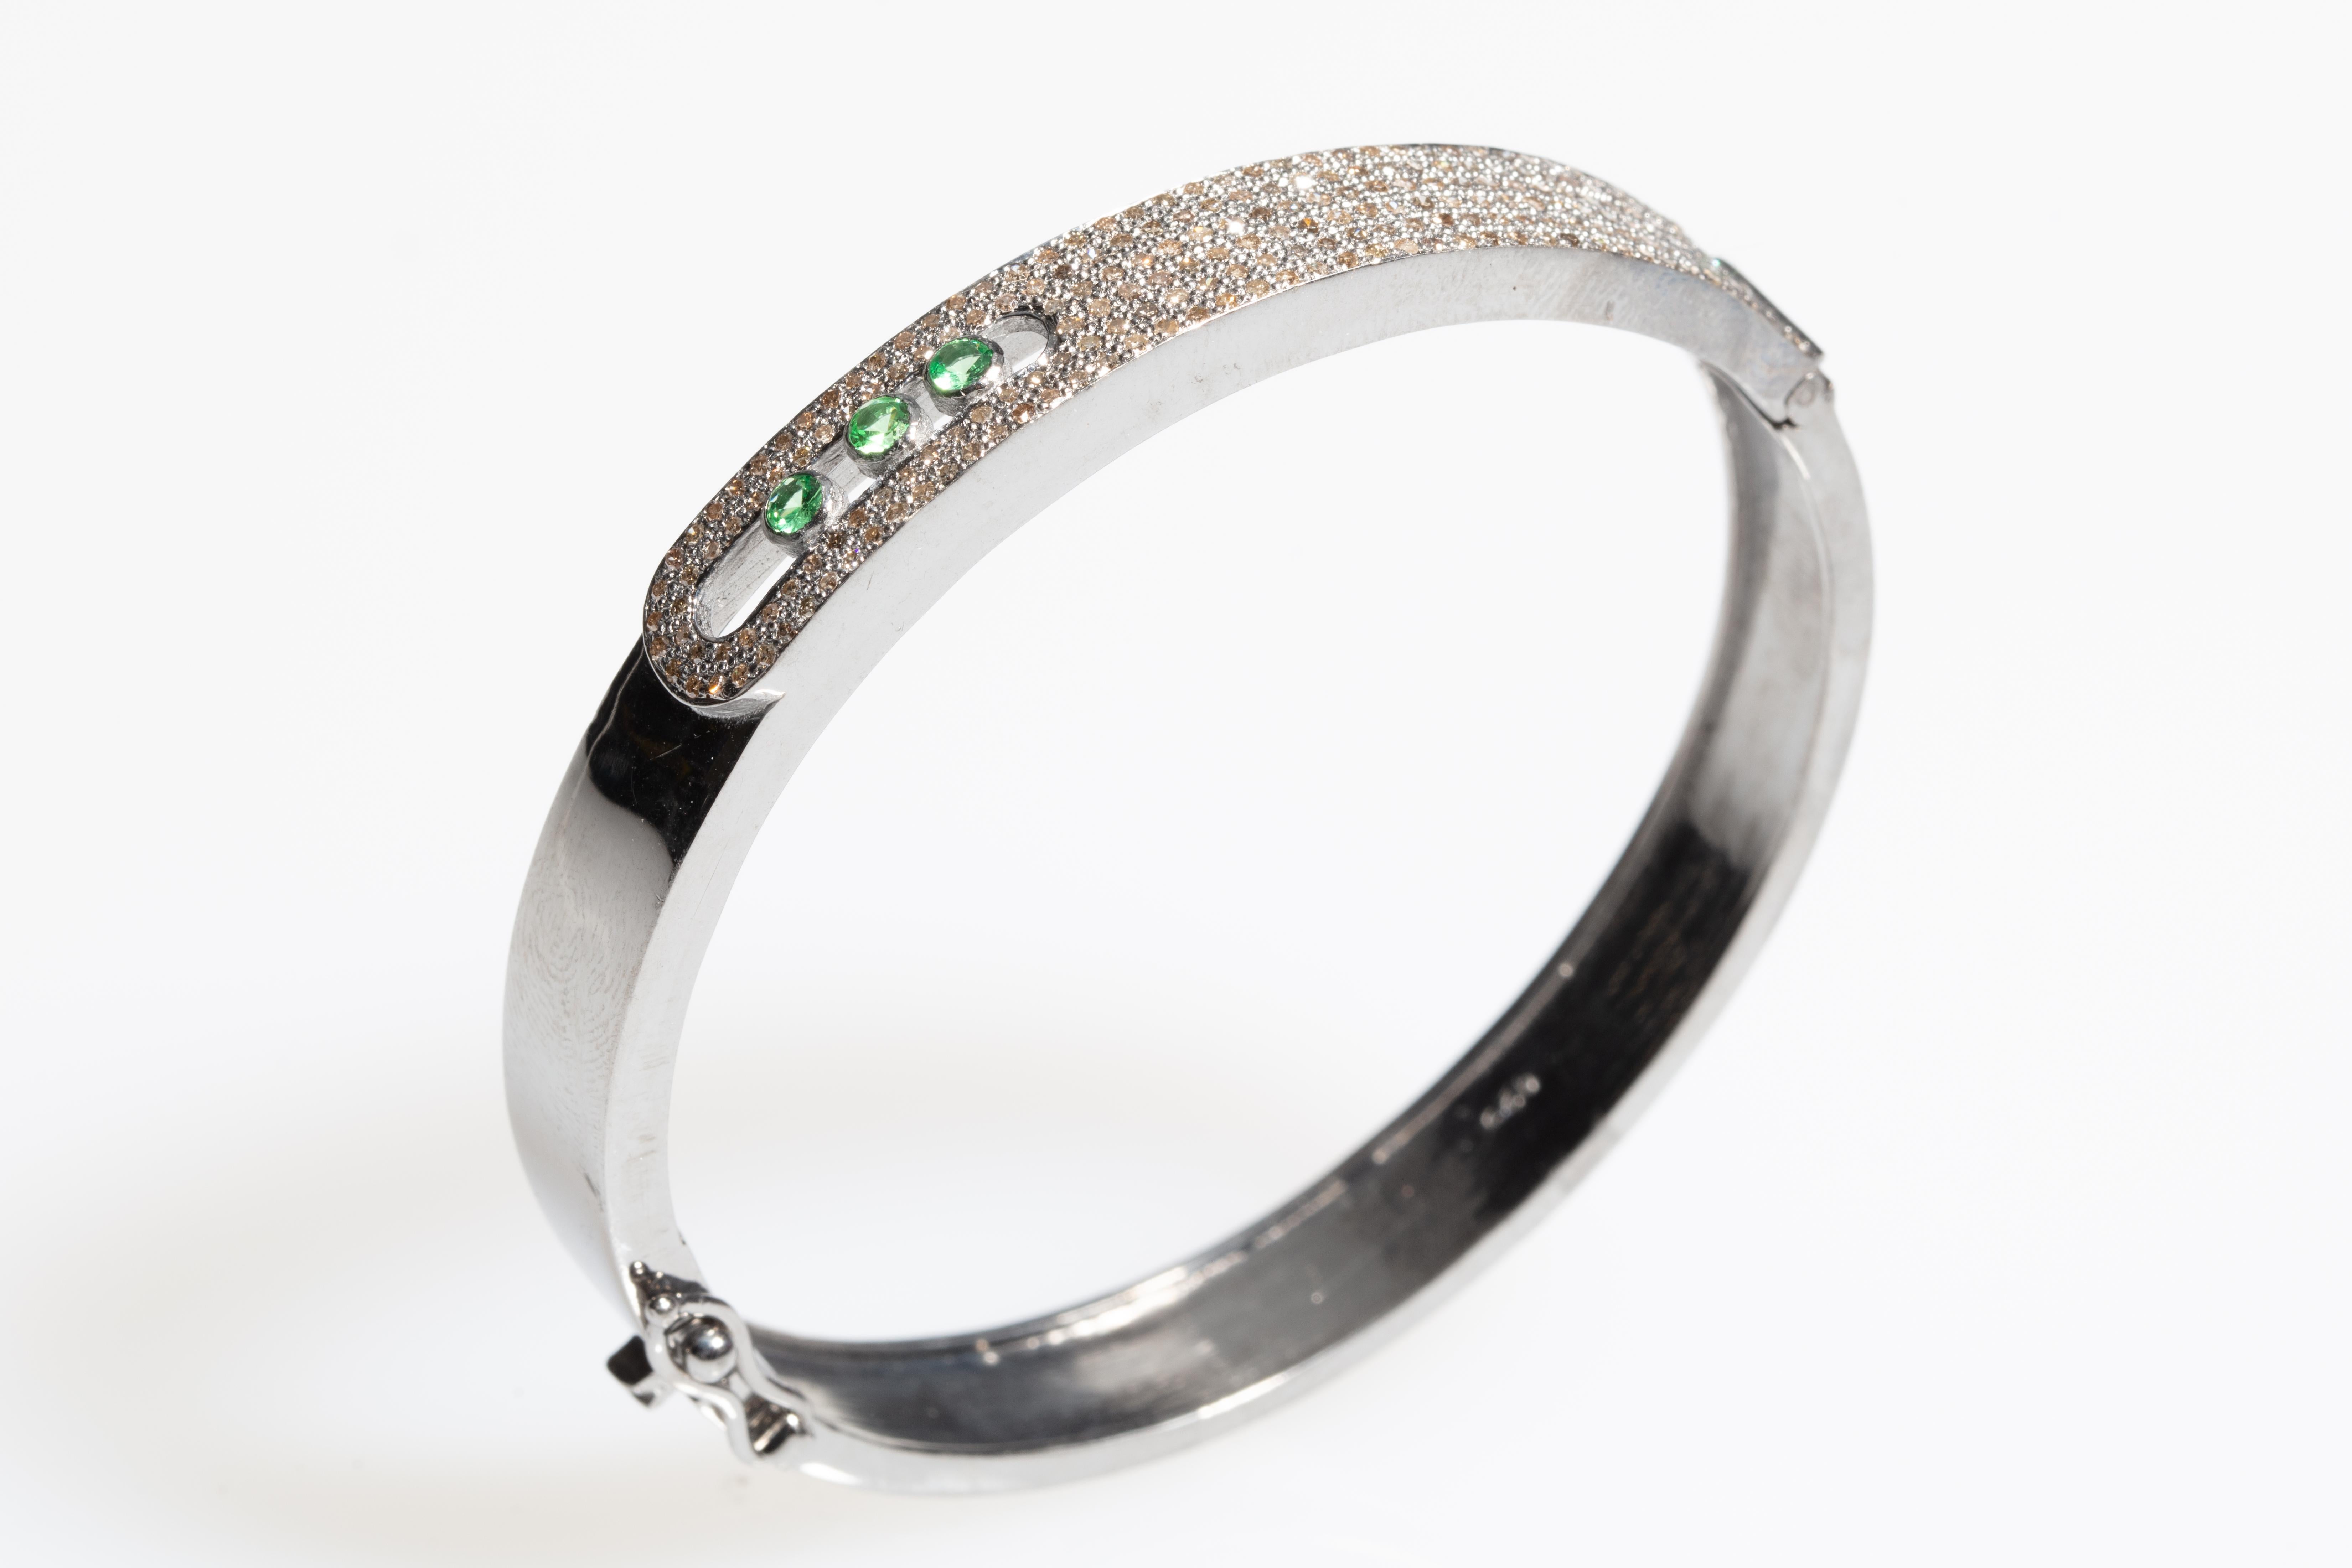 Pave`-set brilliant cut diamonds along the top of the sterling bracelet with three floating, faceted round tsavorite stones.  Push clasp with a side safety.  Oval shape keeps the stones sitting on top of the wrist.  Inside circumference is 6.5